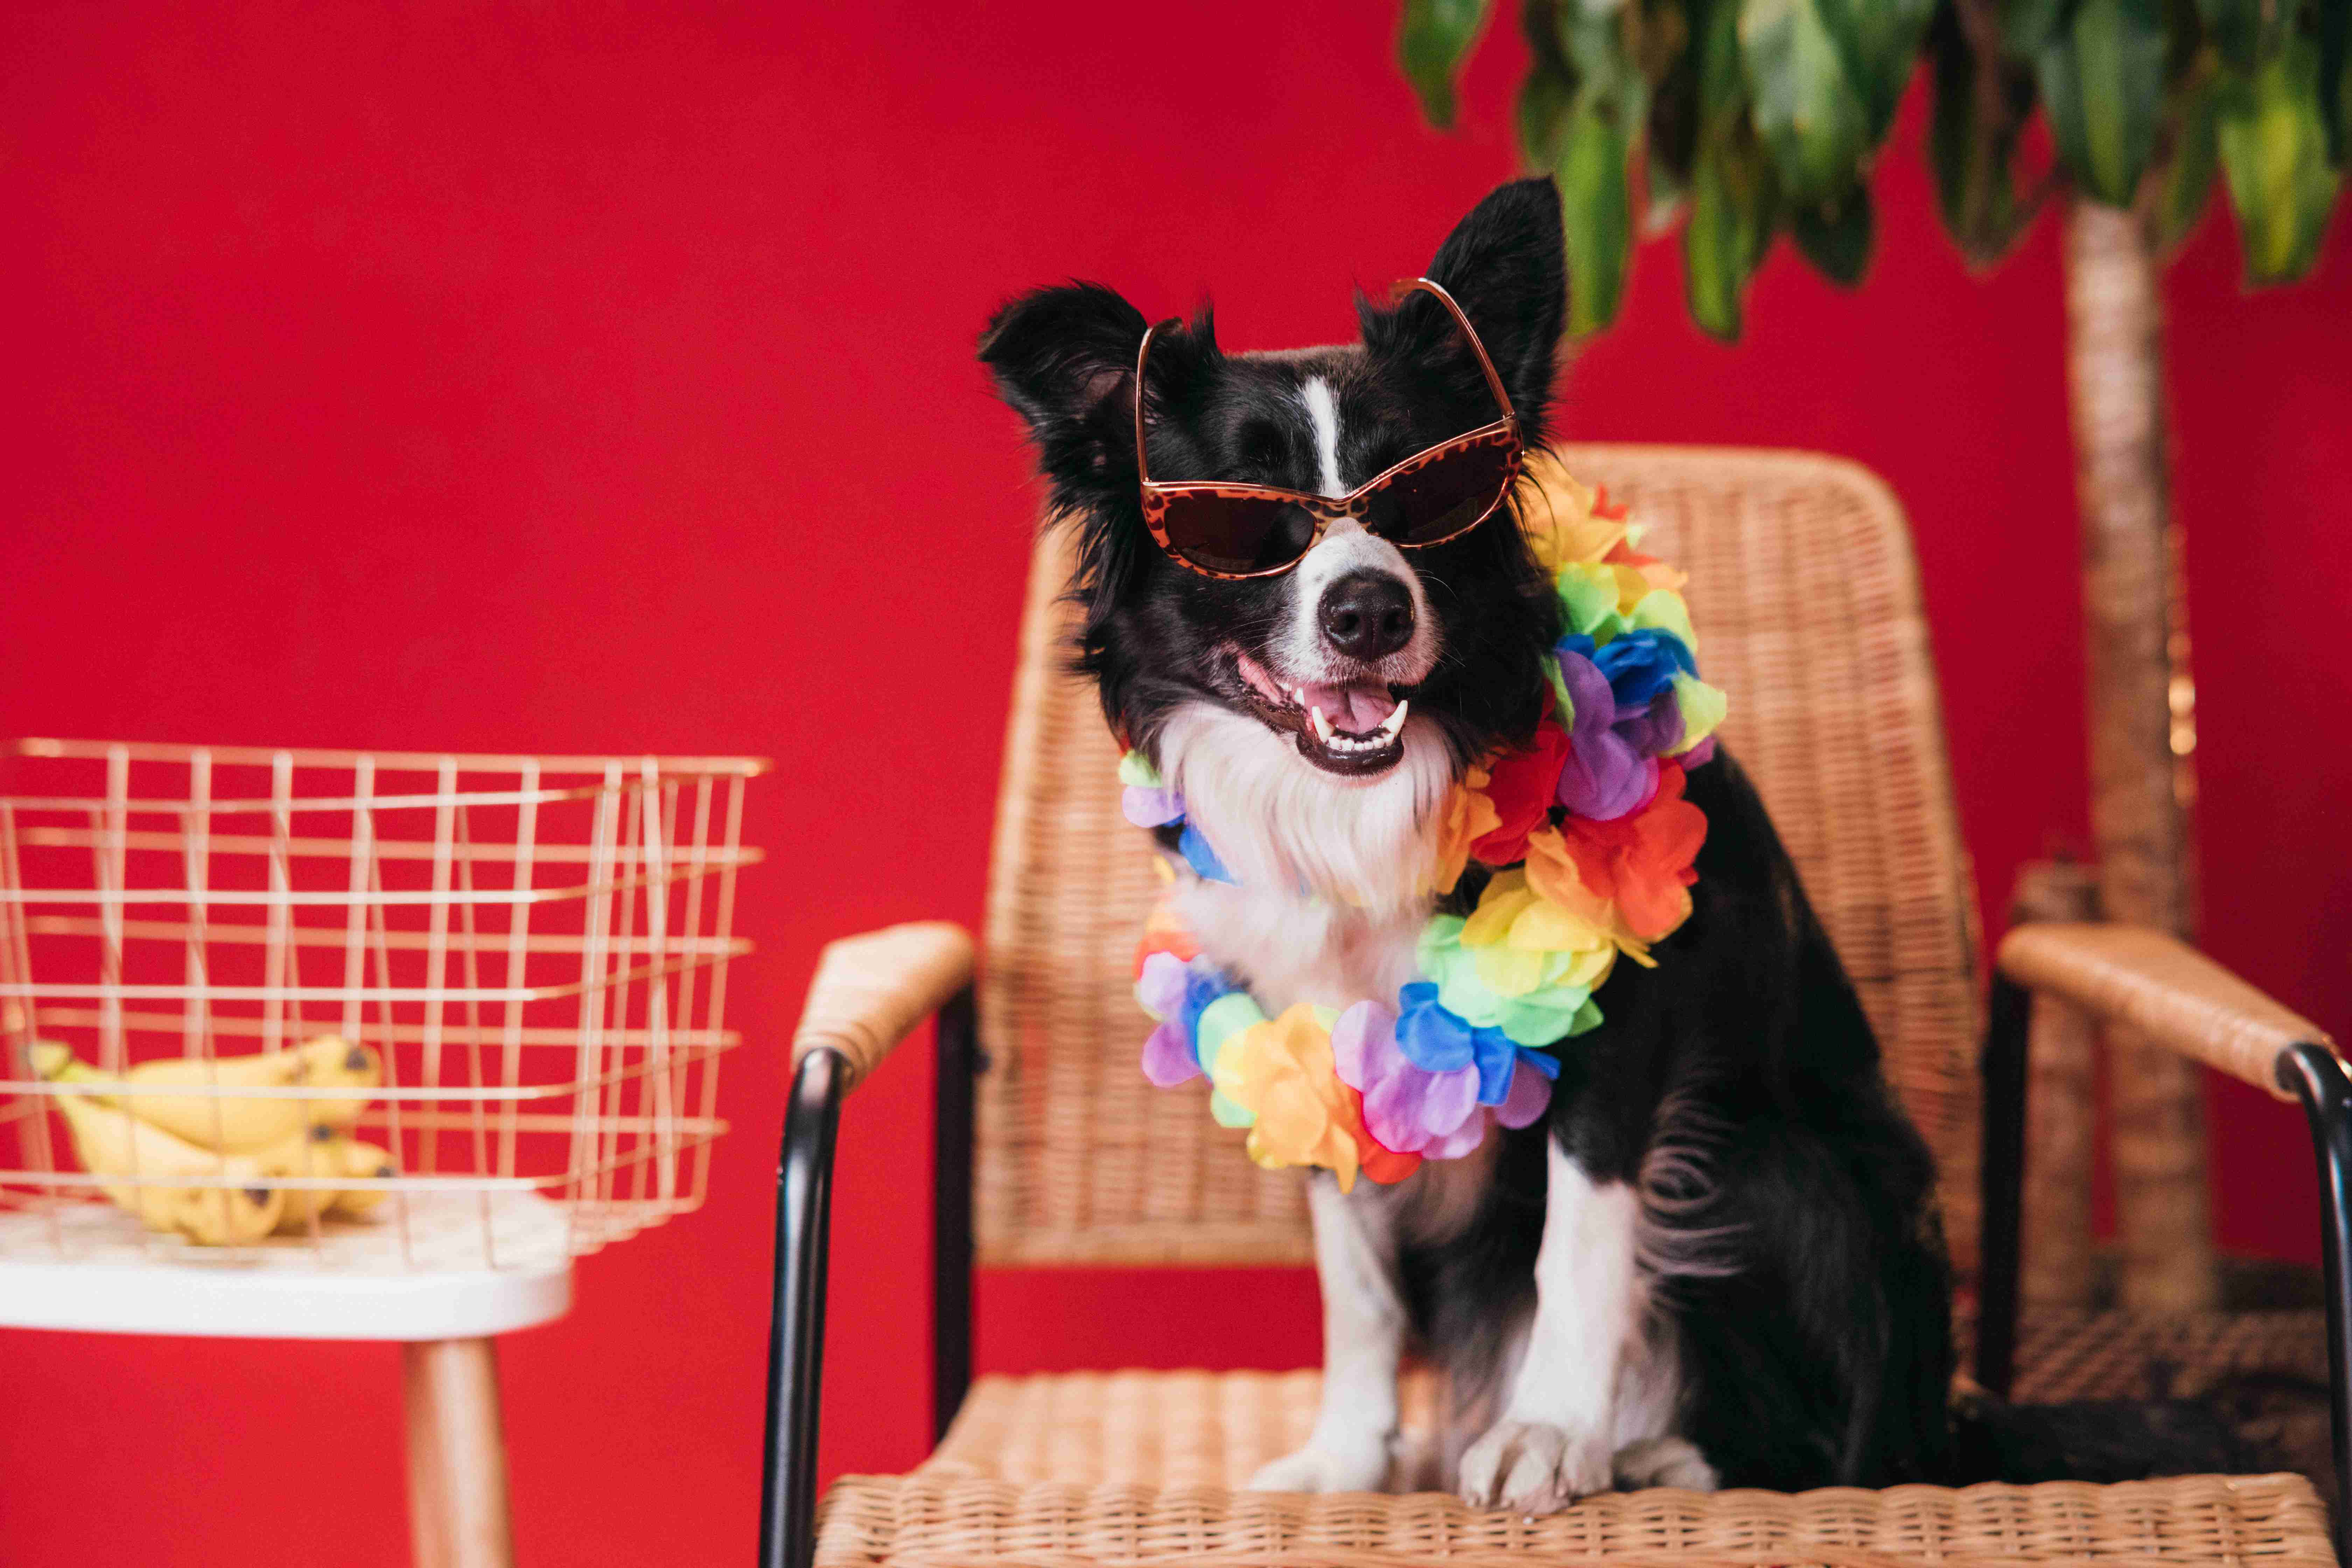 Thunderstorm Survival Guide: How to Train Your Border Collie Puppy to Stay Calm